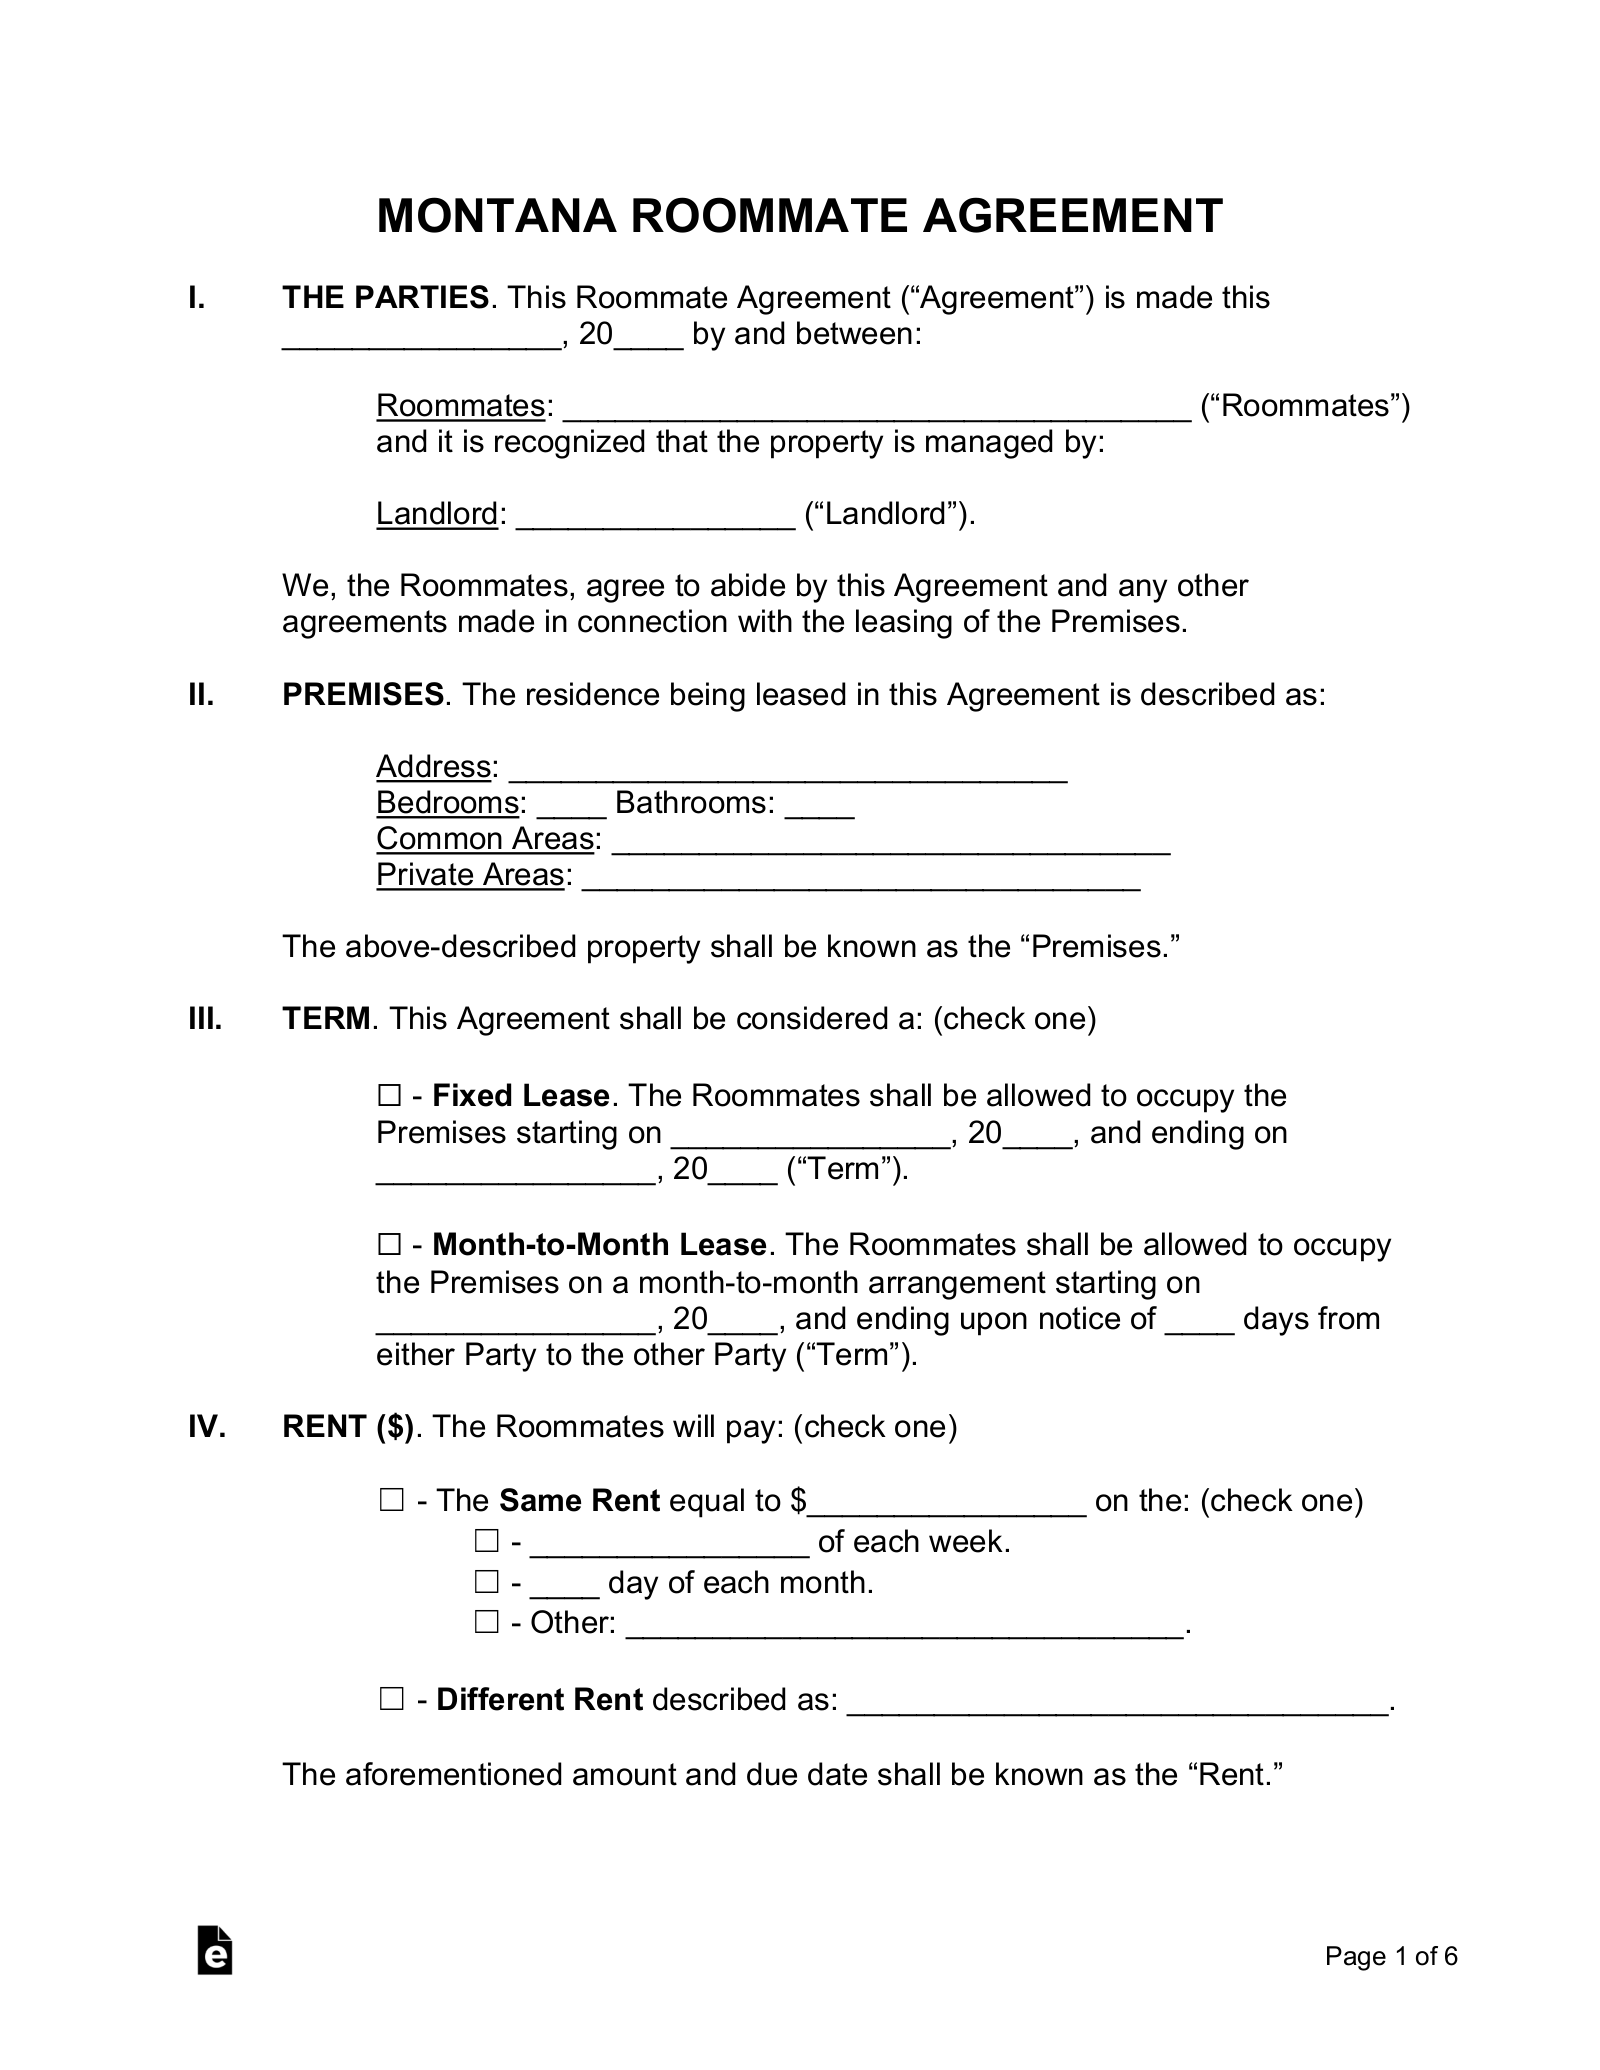 Montana Roommate Agreement Form